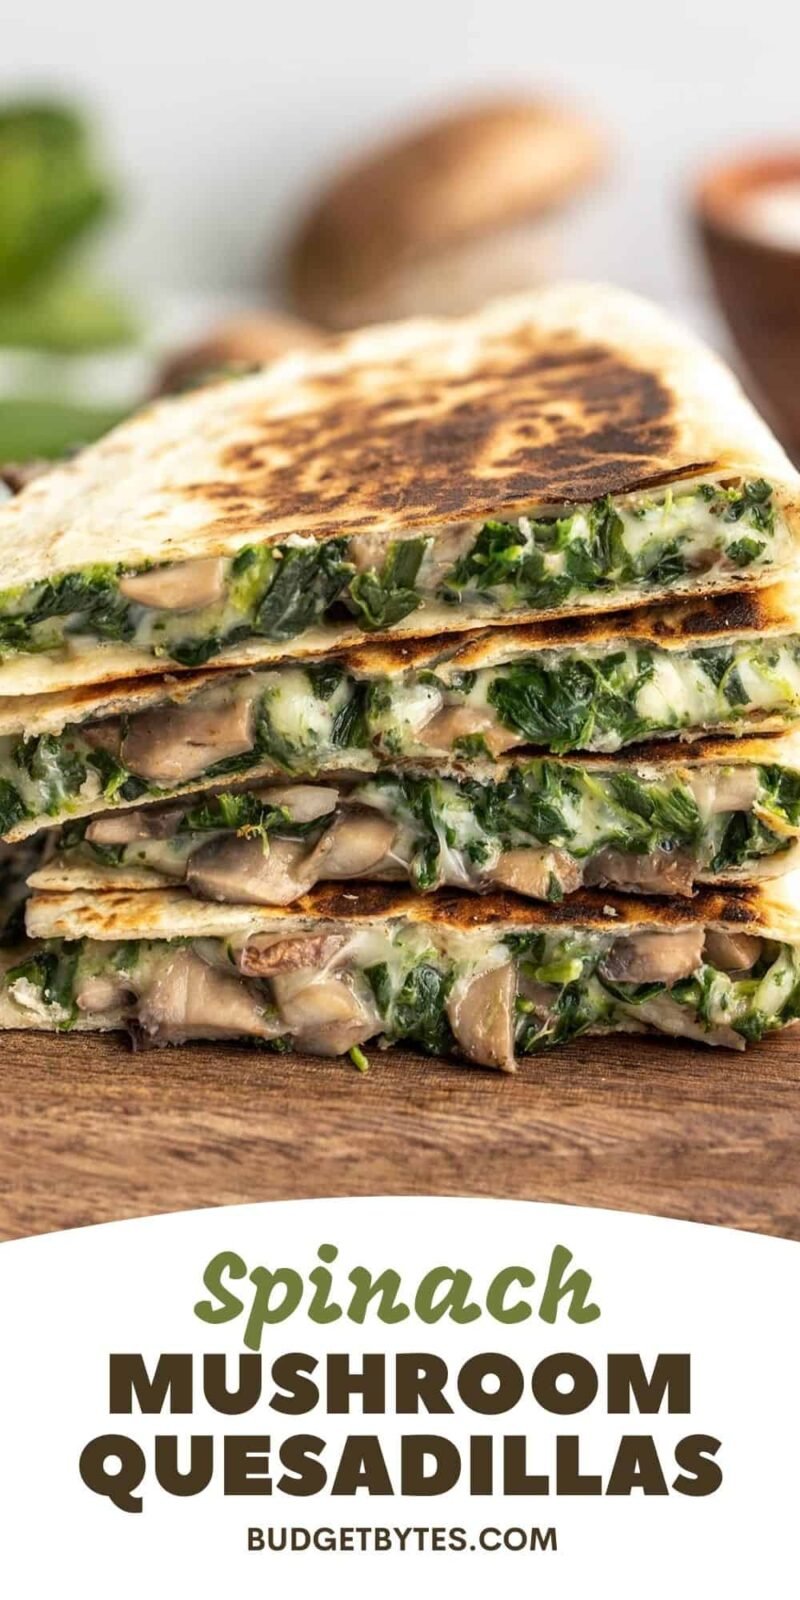 A stack of spinach and mushroom quesadillas, title text at the bottom